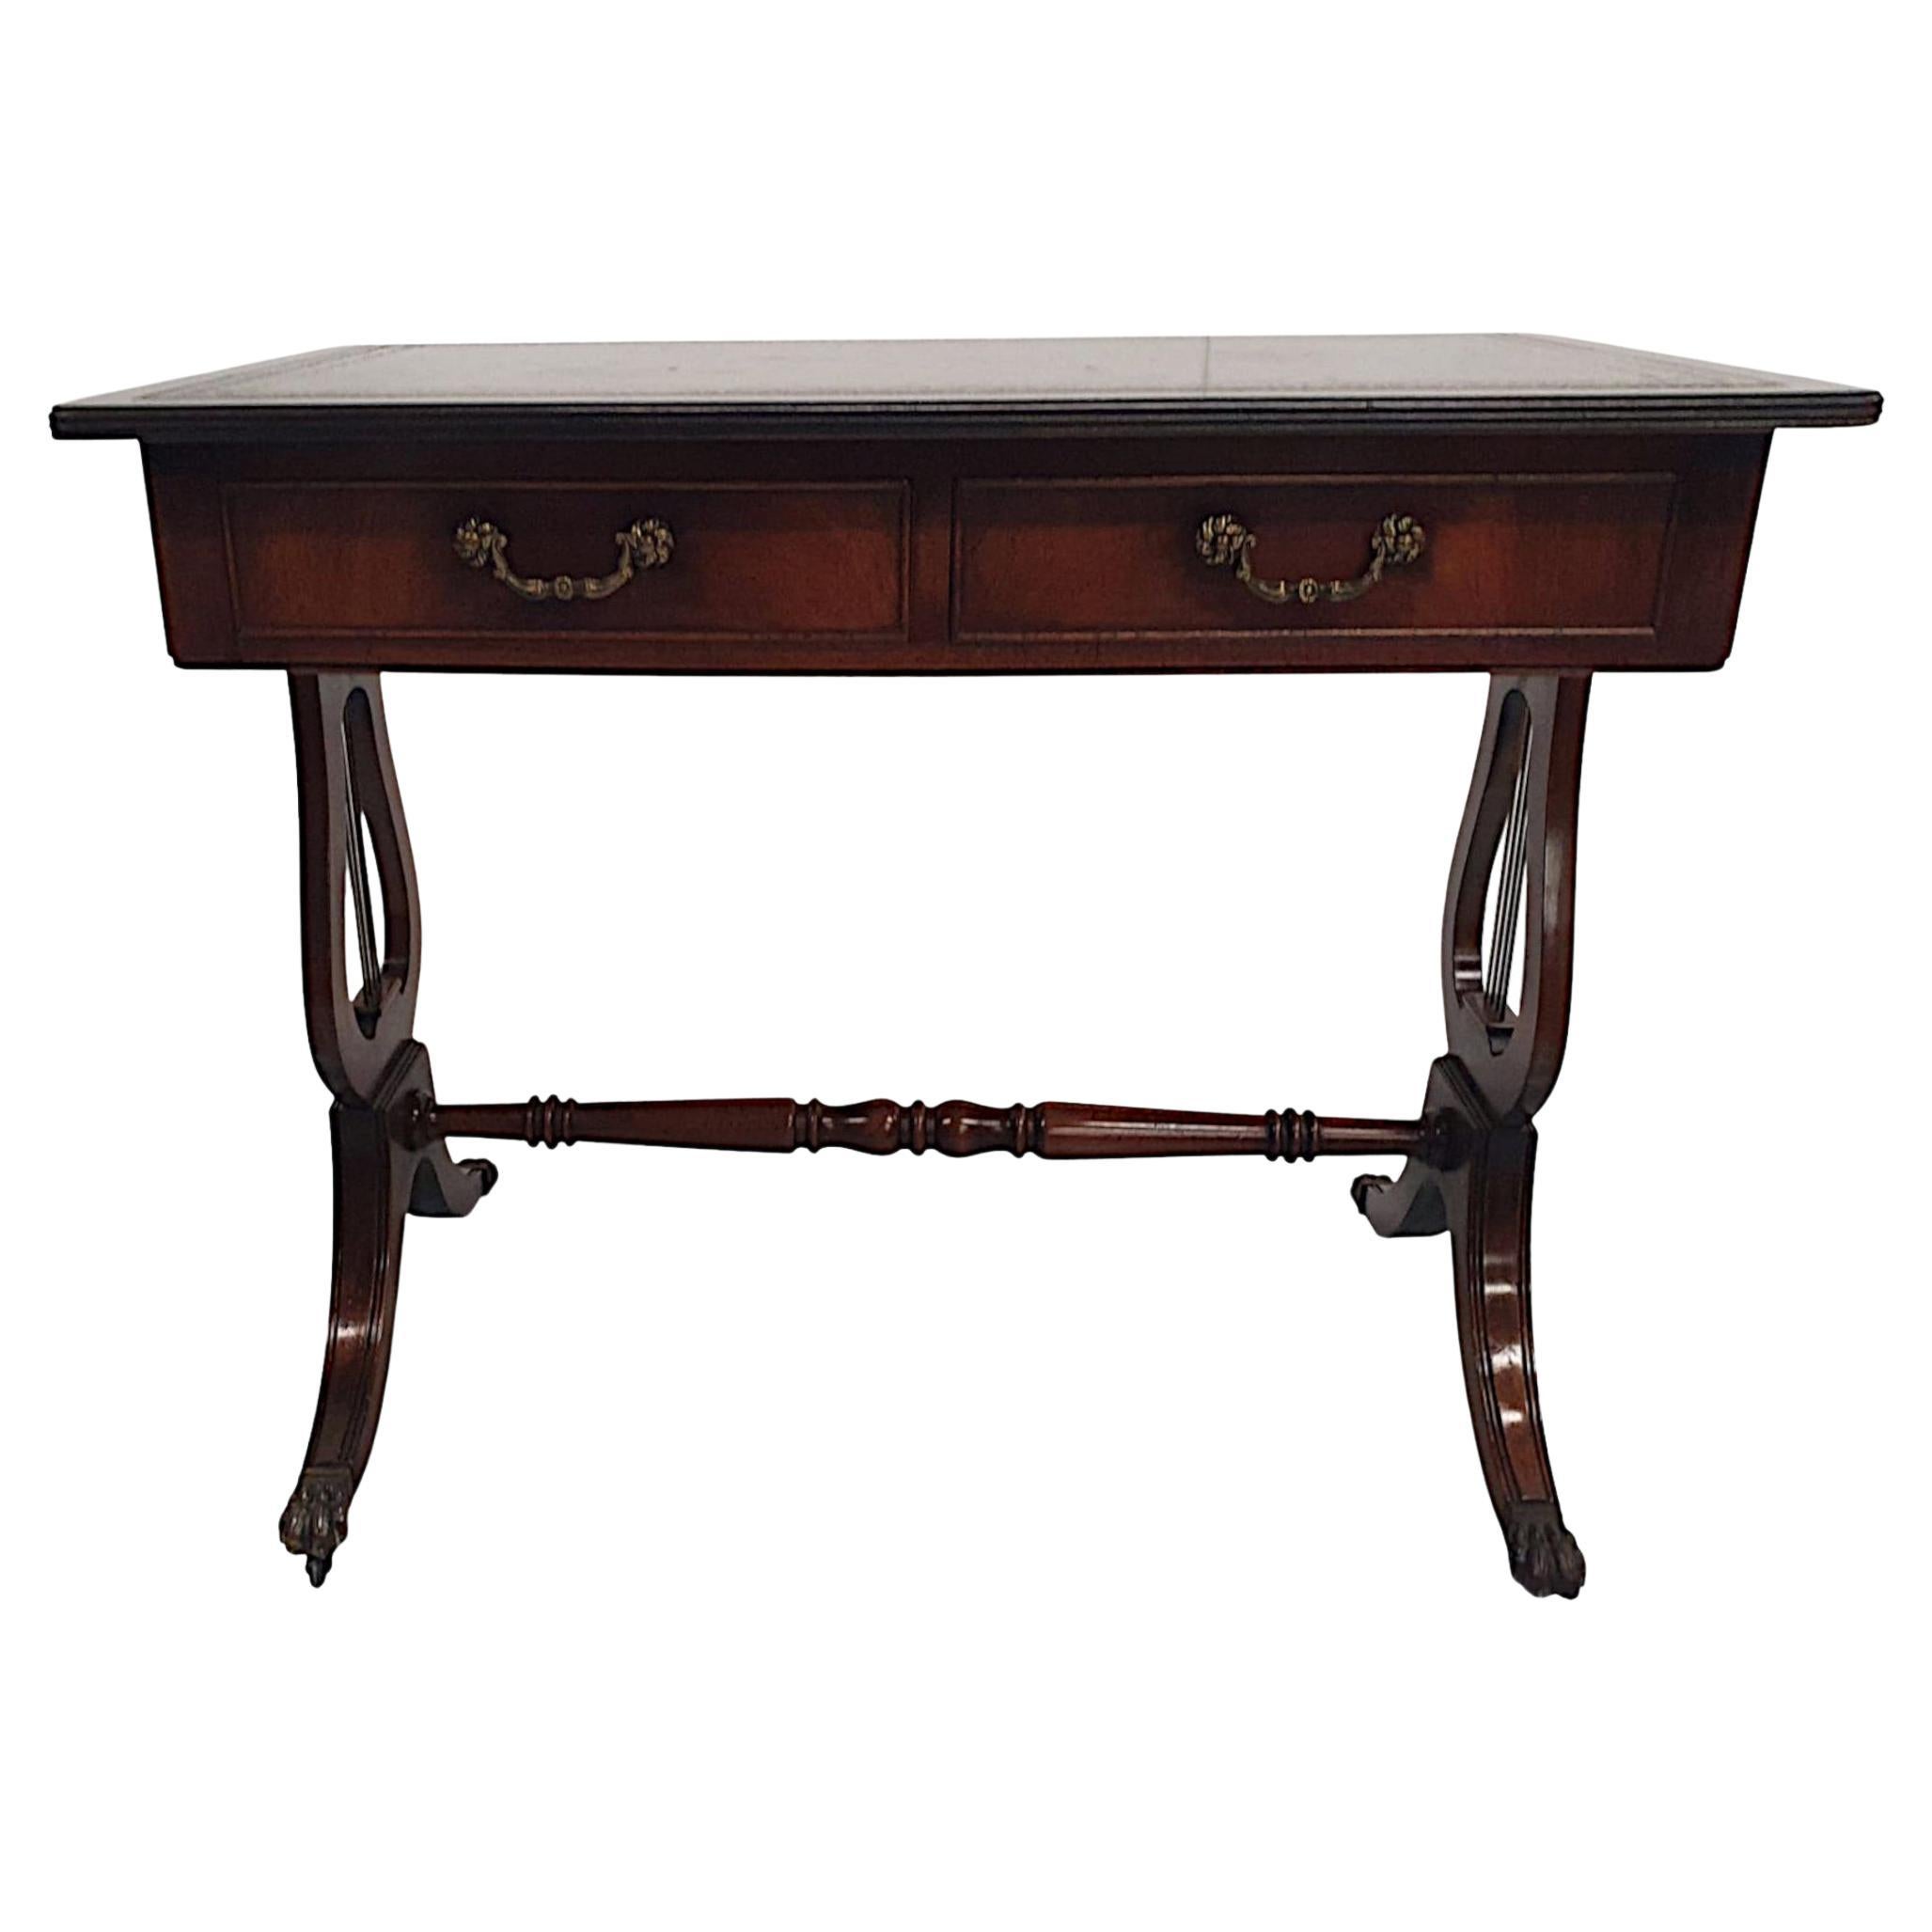 Very Fine 1920s Leather Top Desk or Sofa Table